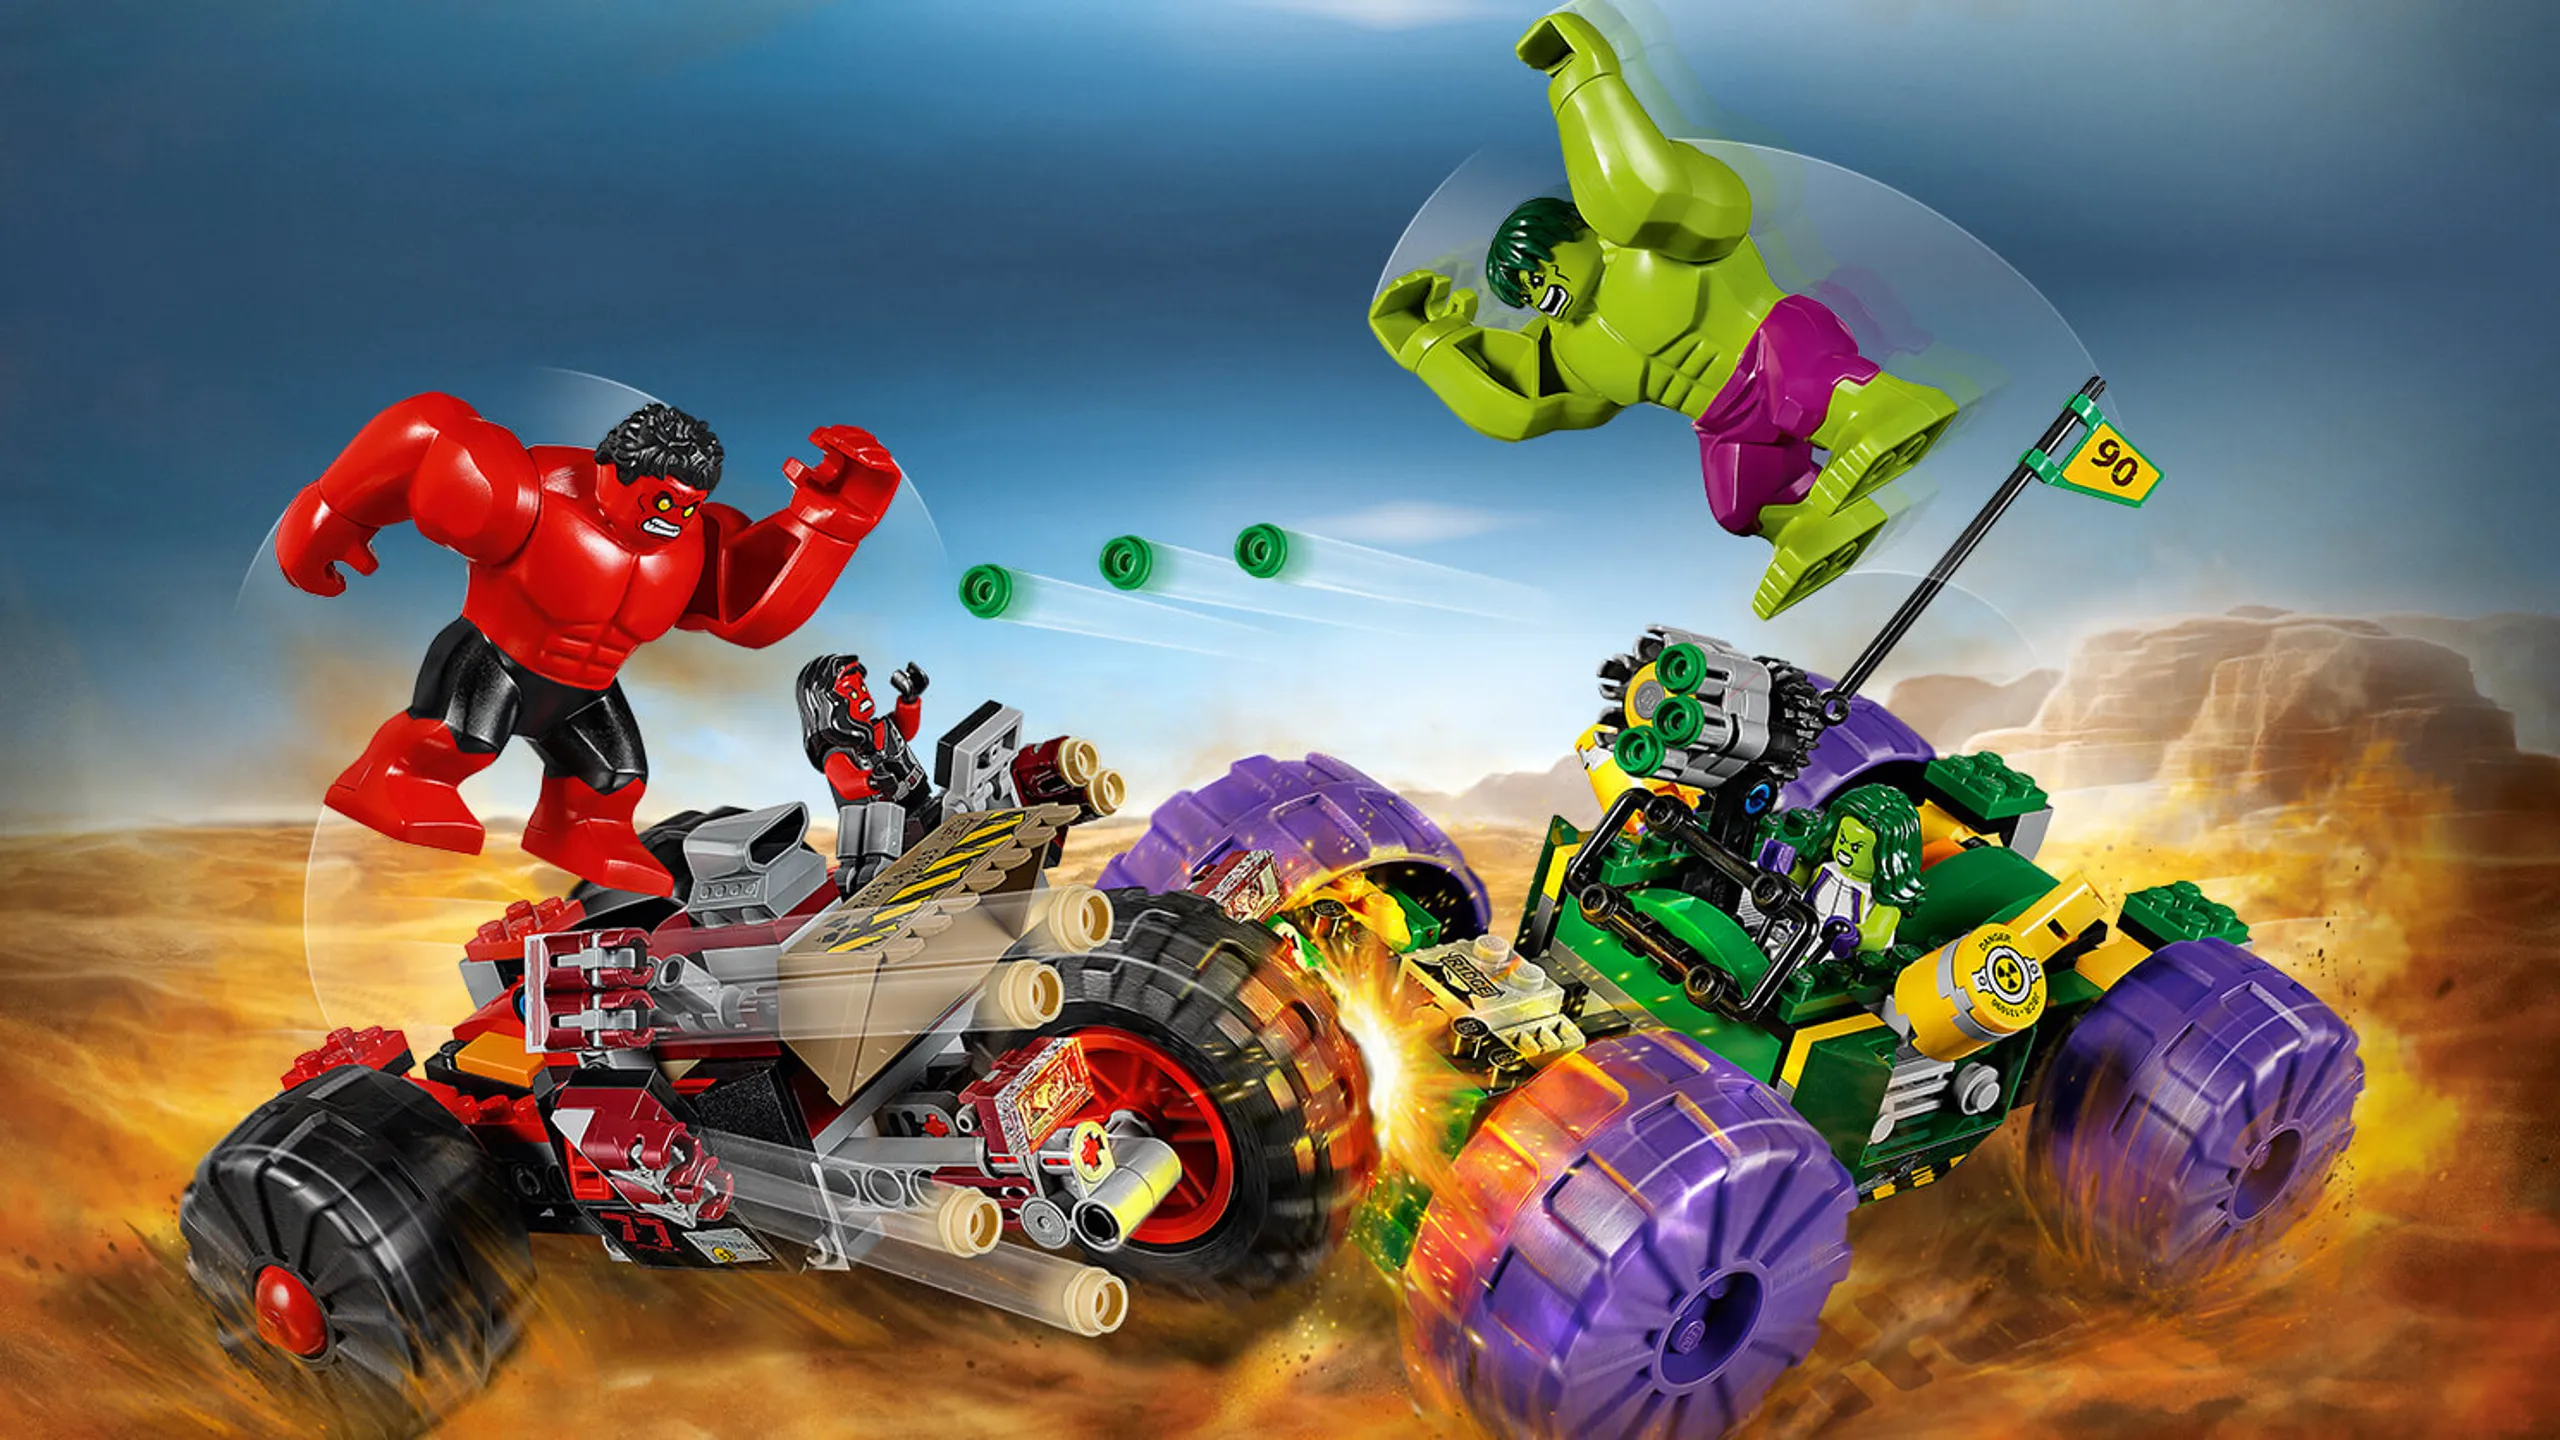 LEGO Super Heroes - 76078 Hulk vs. Red Hulk - Hulk and She-Hulk is in a battle against Red Hulk and Red She-Hulk with twin-stud and six-stud shooters.